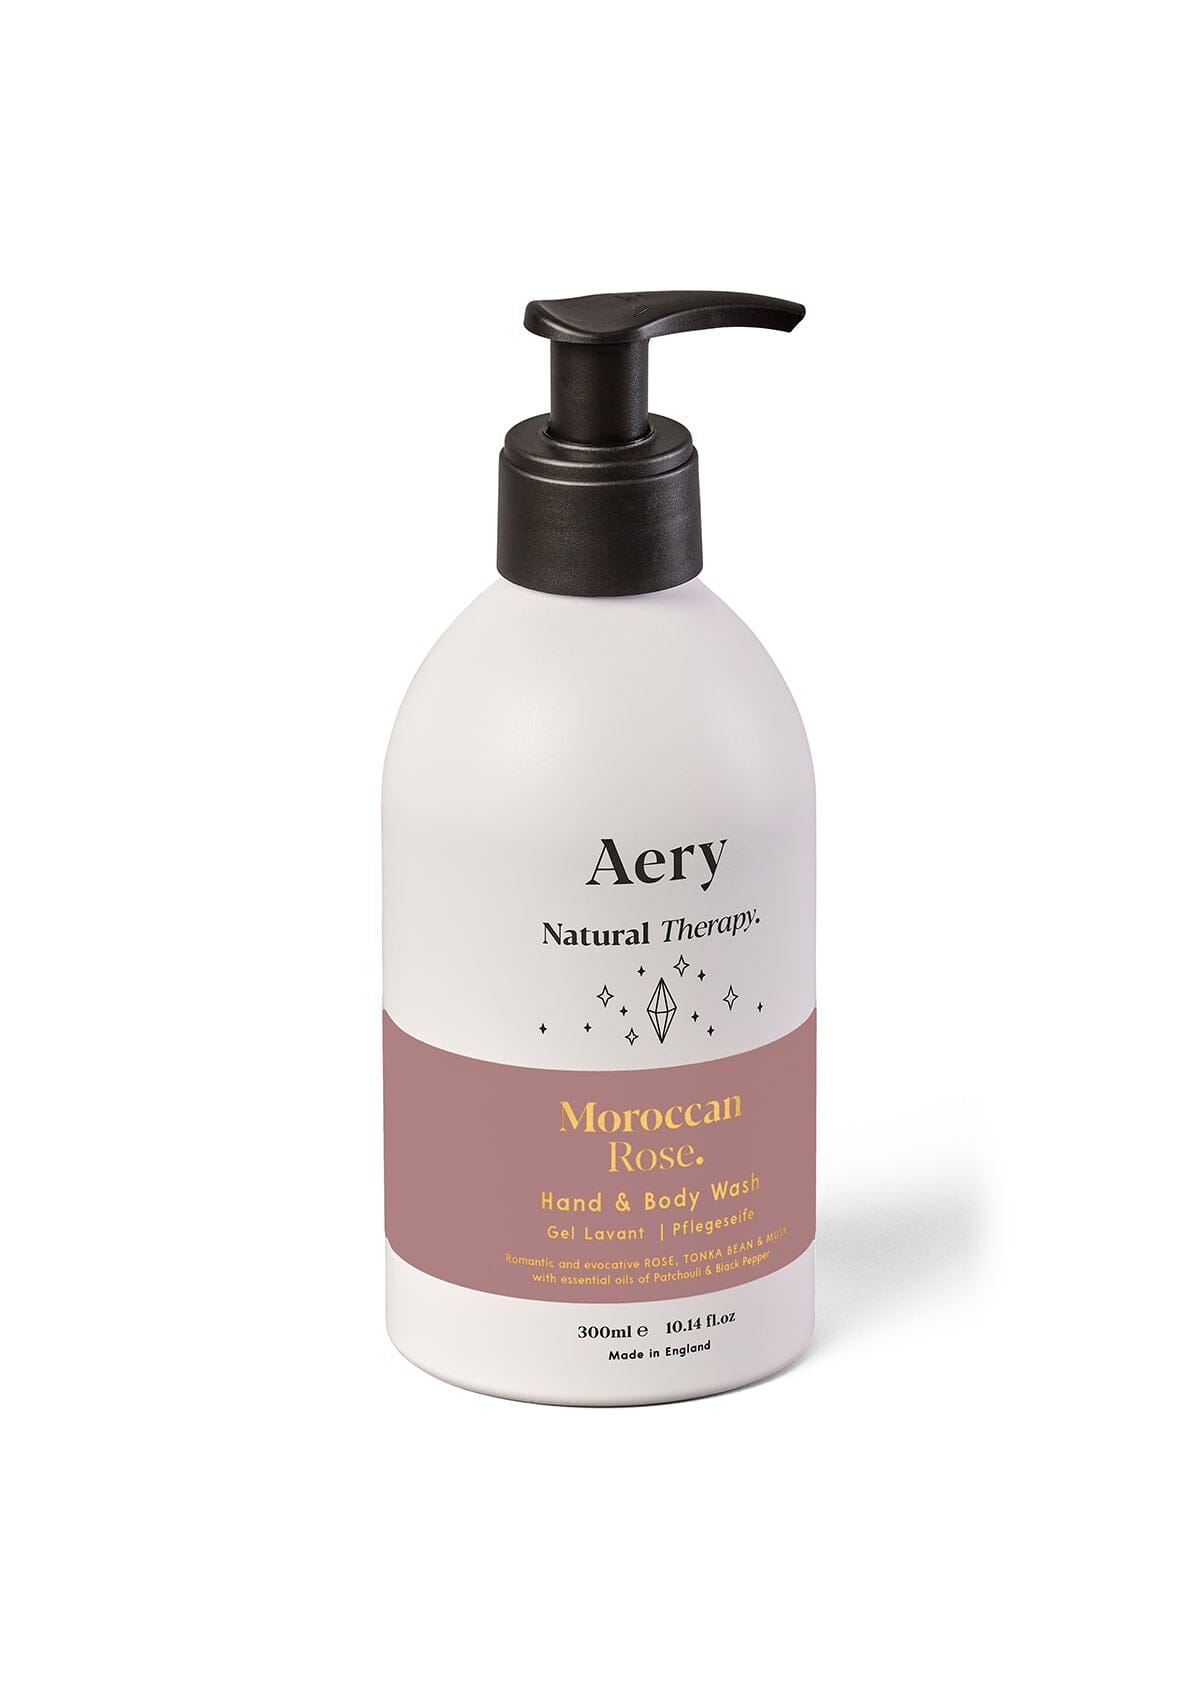 Aubergine Moroccan Rose Hand and Body Wash by Aery displayed on white background